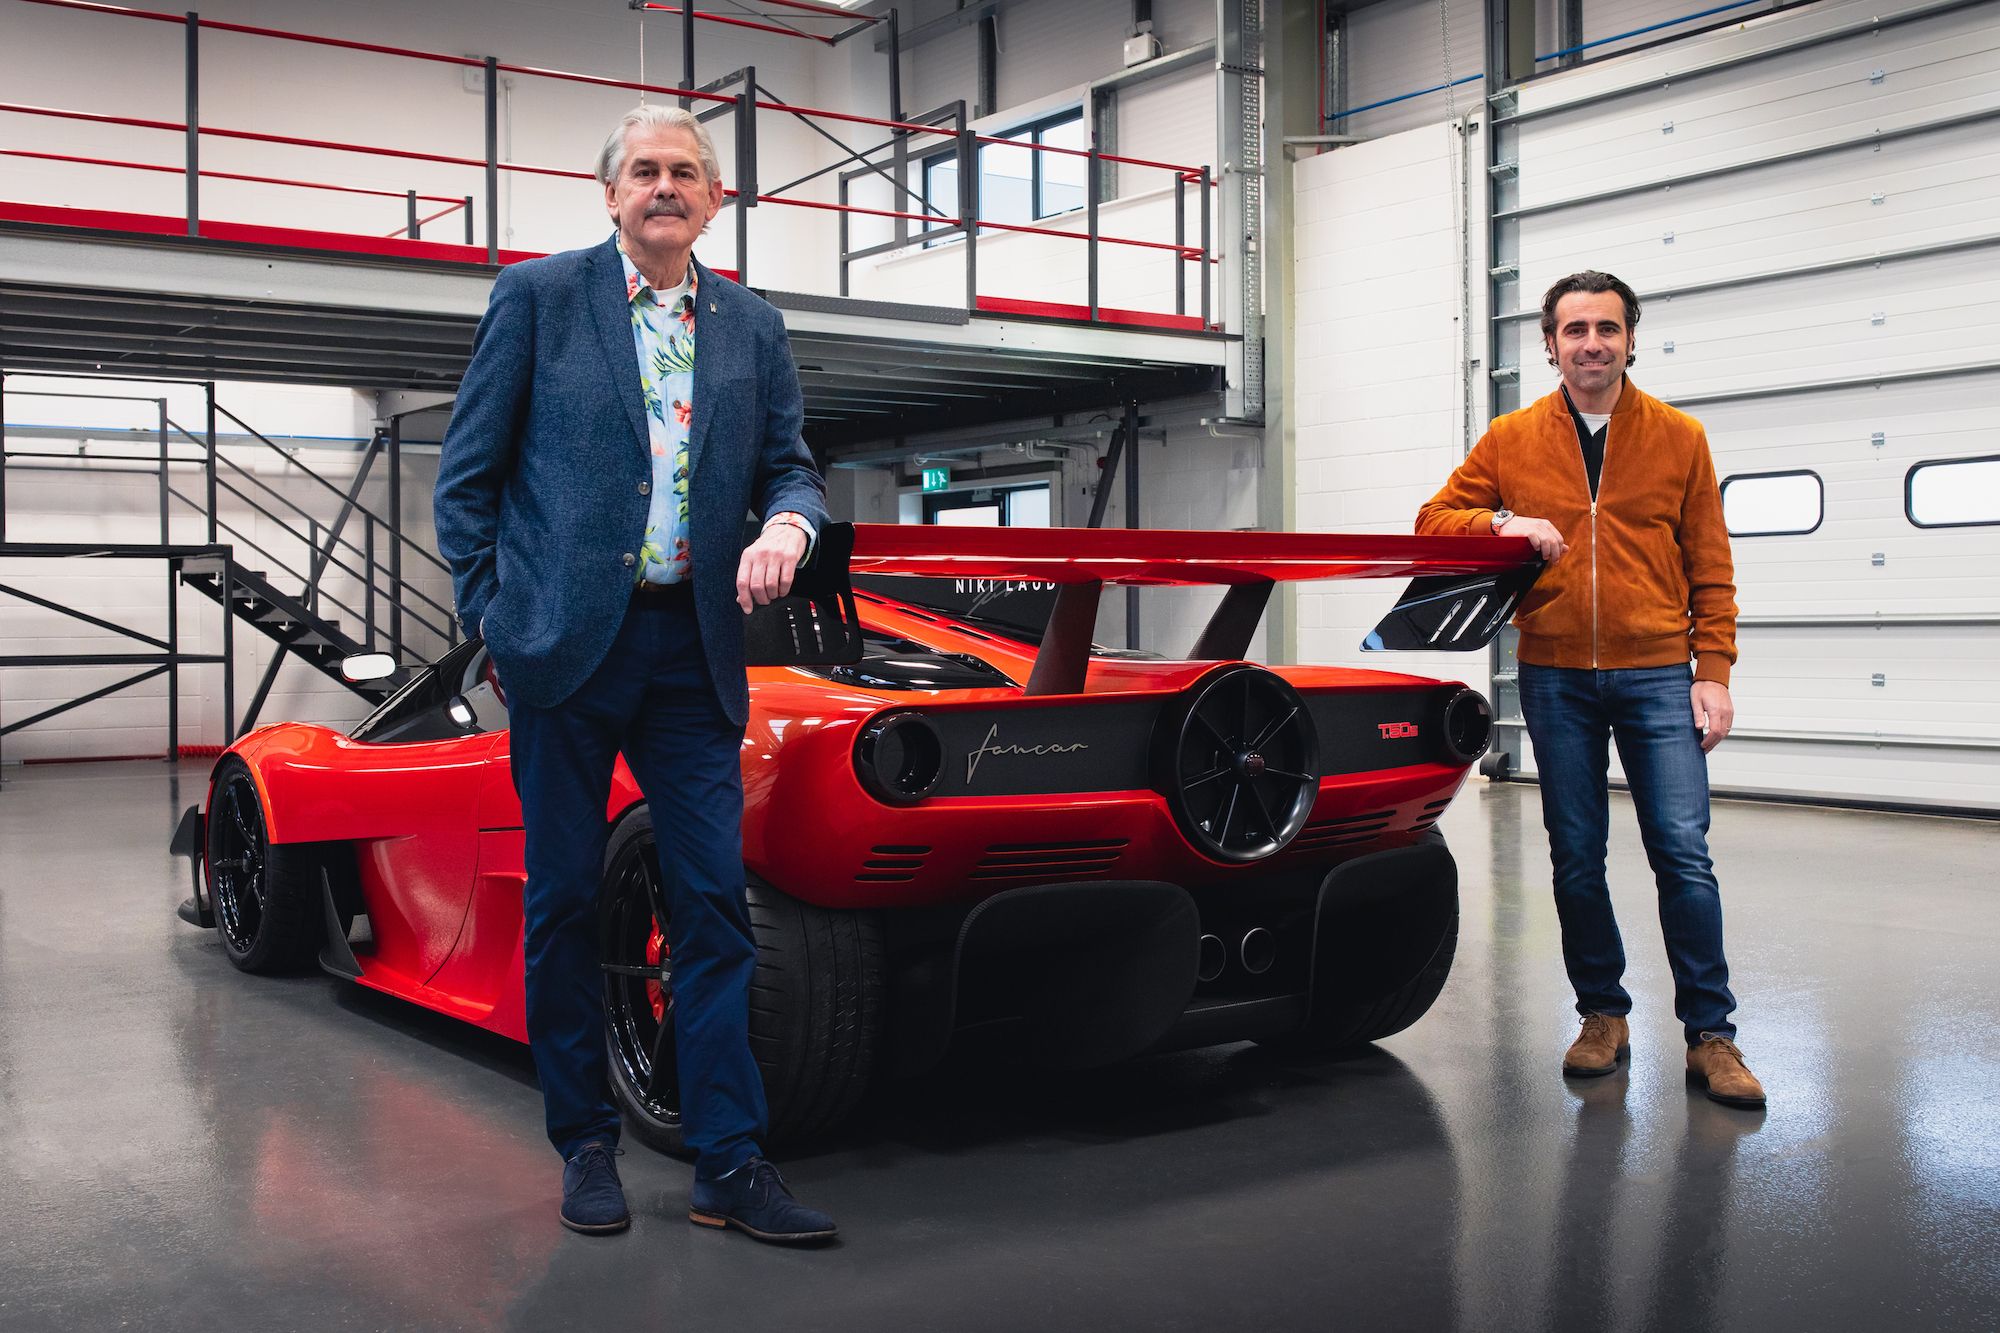 Gordon Murray Automotive Will Use V-12s For as Long as Possible